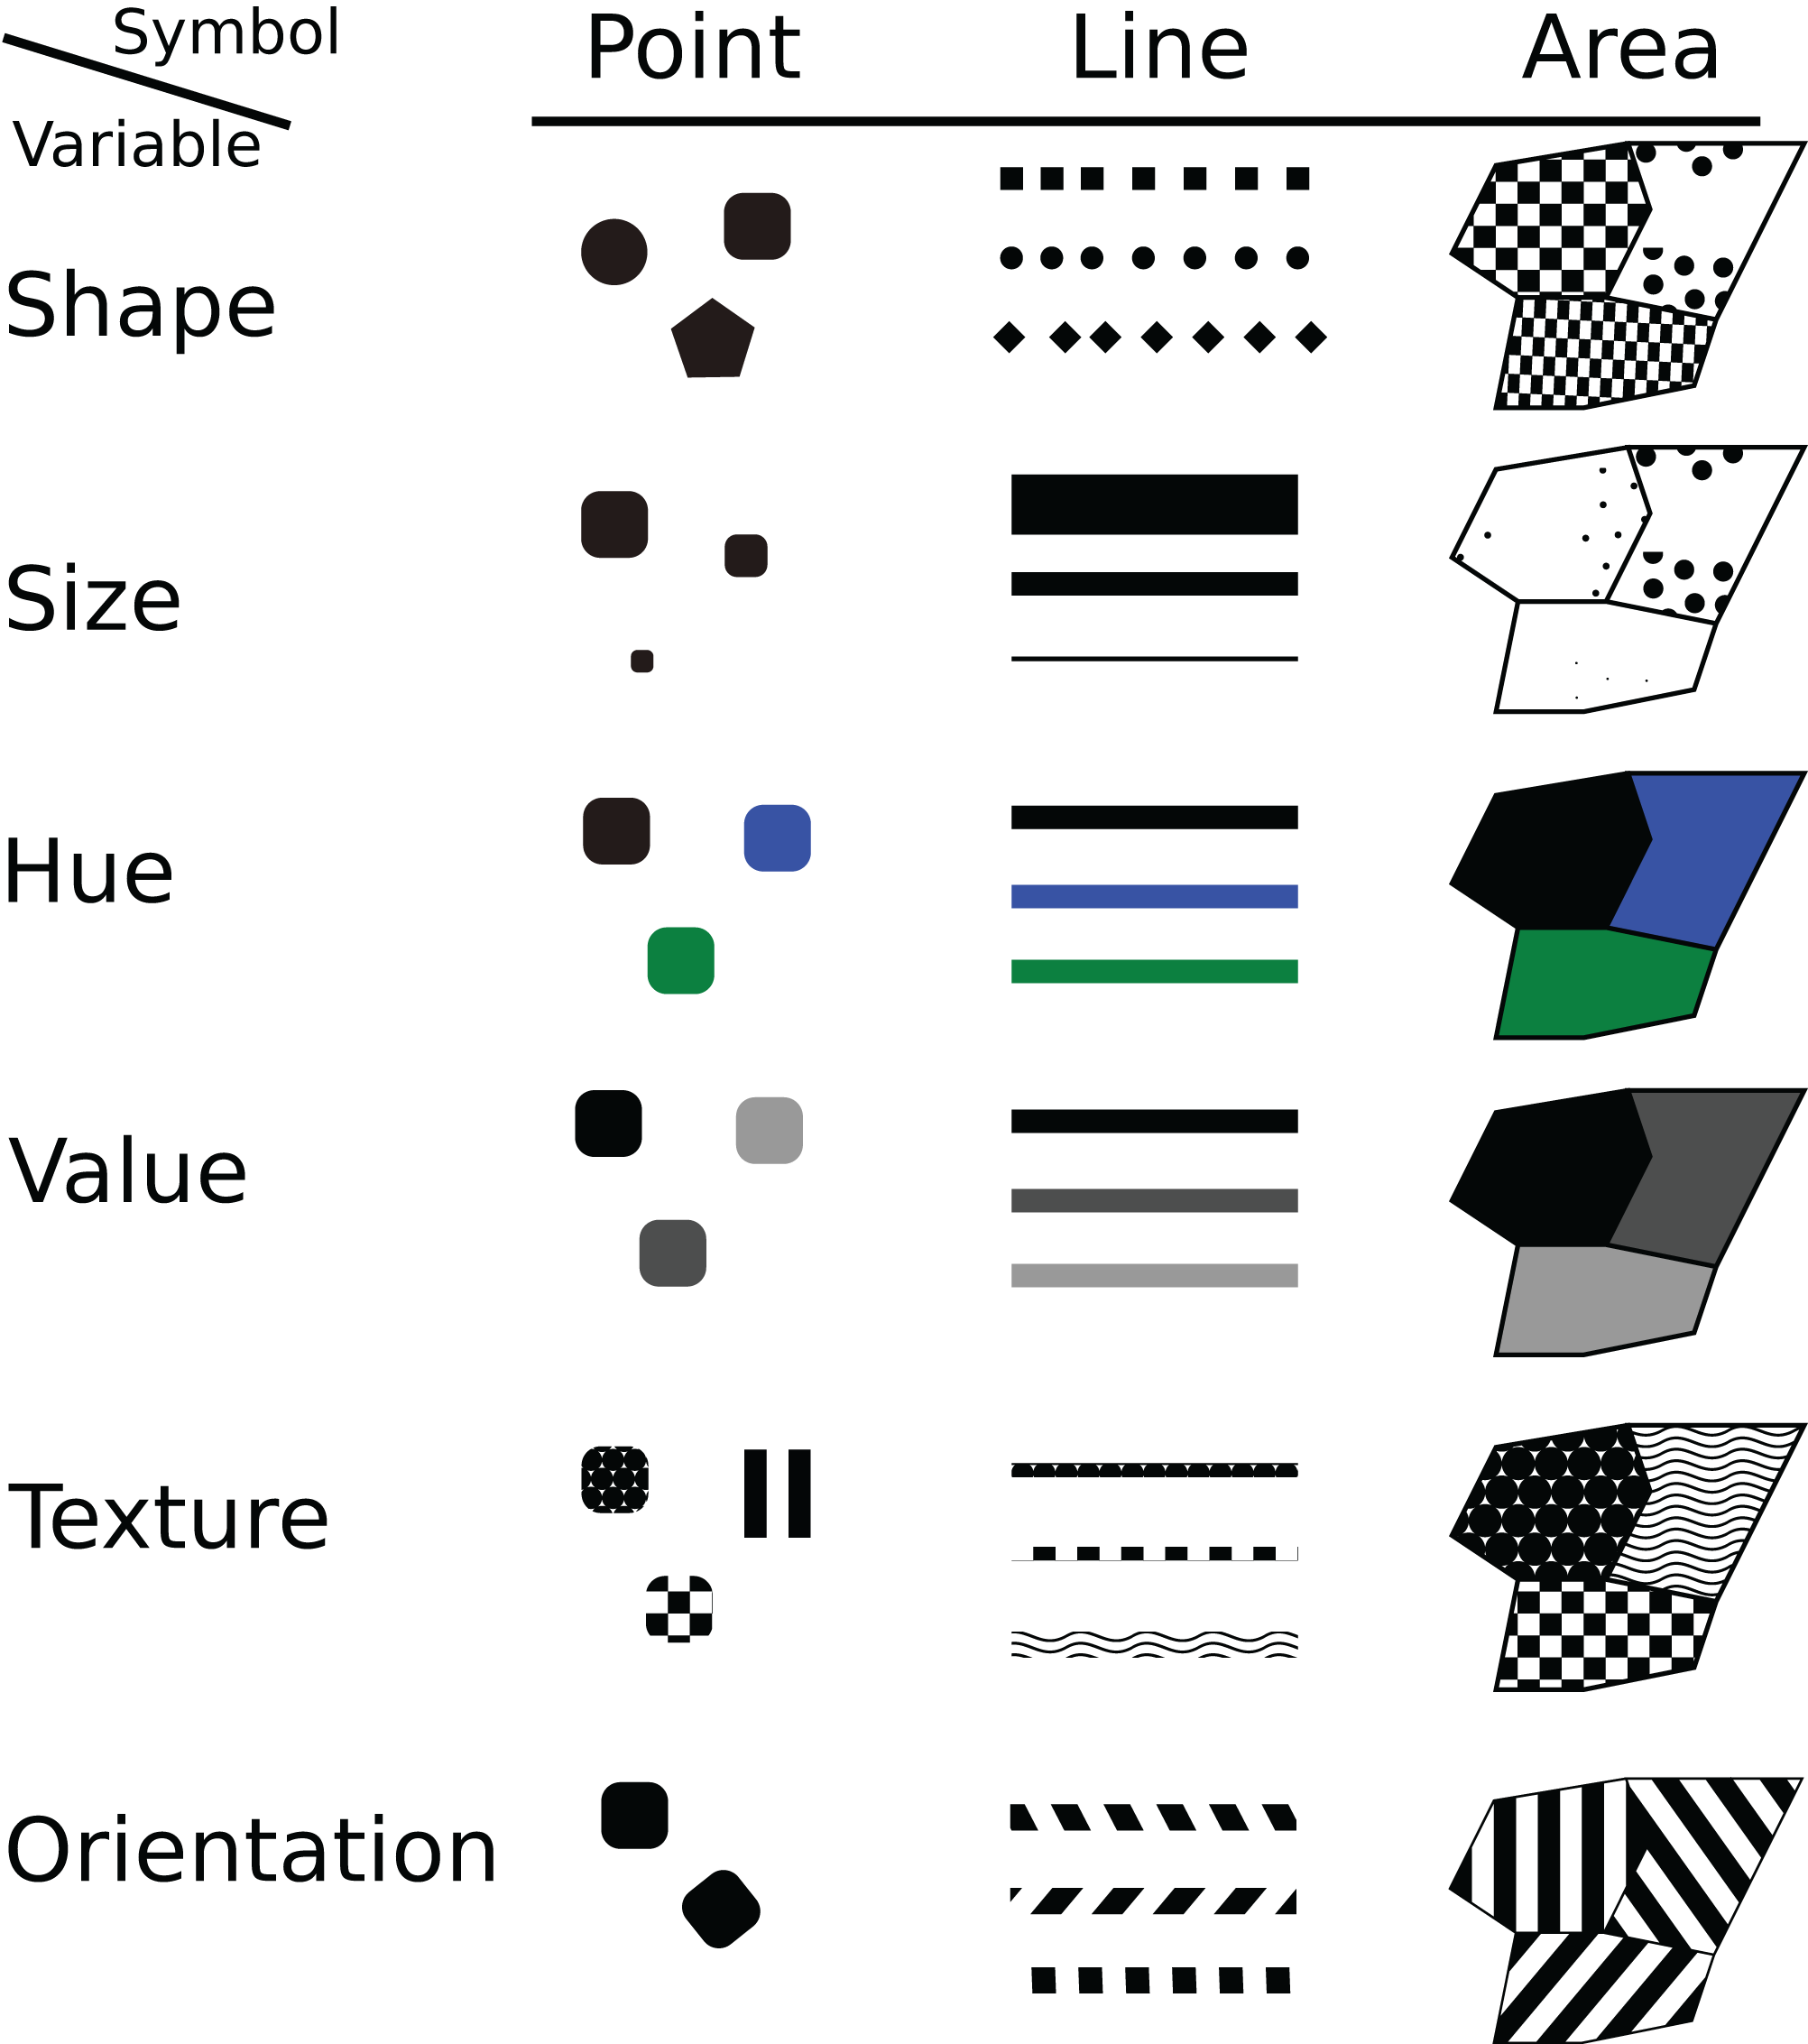 Bertin's taxonomy on the relative effectiveness of various display